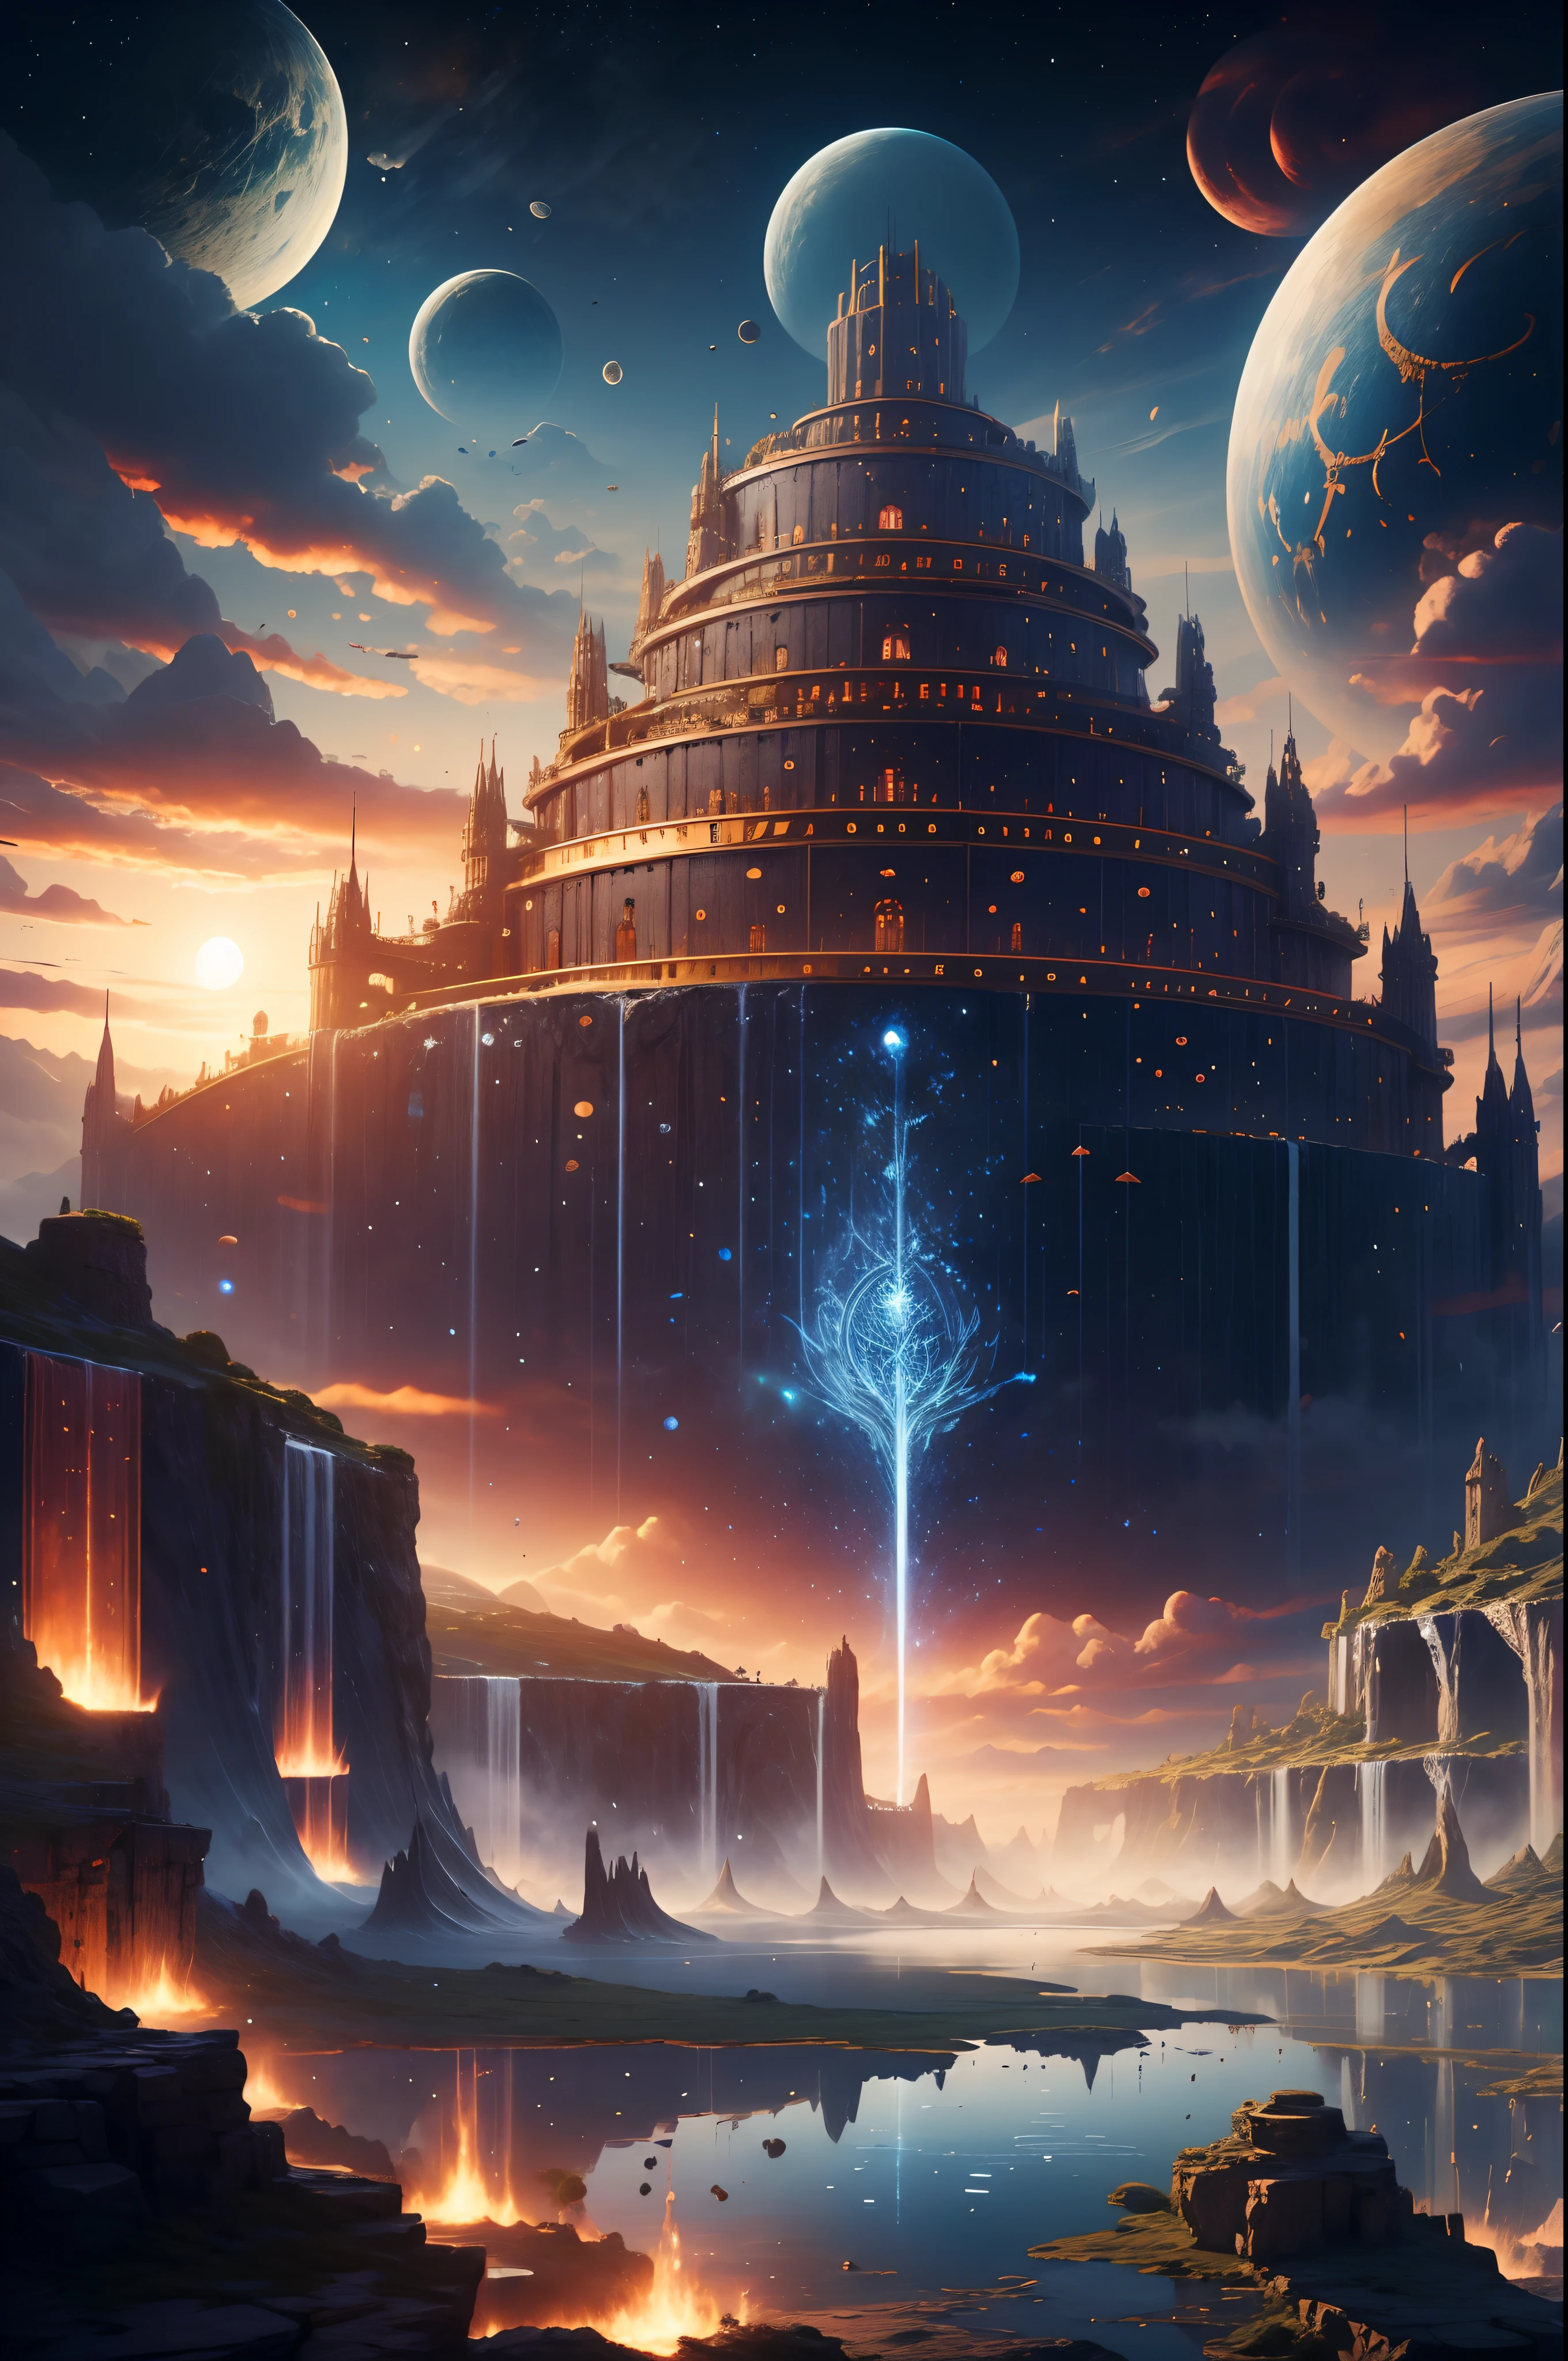 Asgardia, inspired by Norse mythology, is home to mythical beings and gods. Enormous halls and majestic fortresses punctuate the realm, where valiant warriors engage in epic battles, and feasts of celestial delicacies echo through the realms. This land of legends weaves magic and might into the very fabric of existence